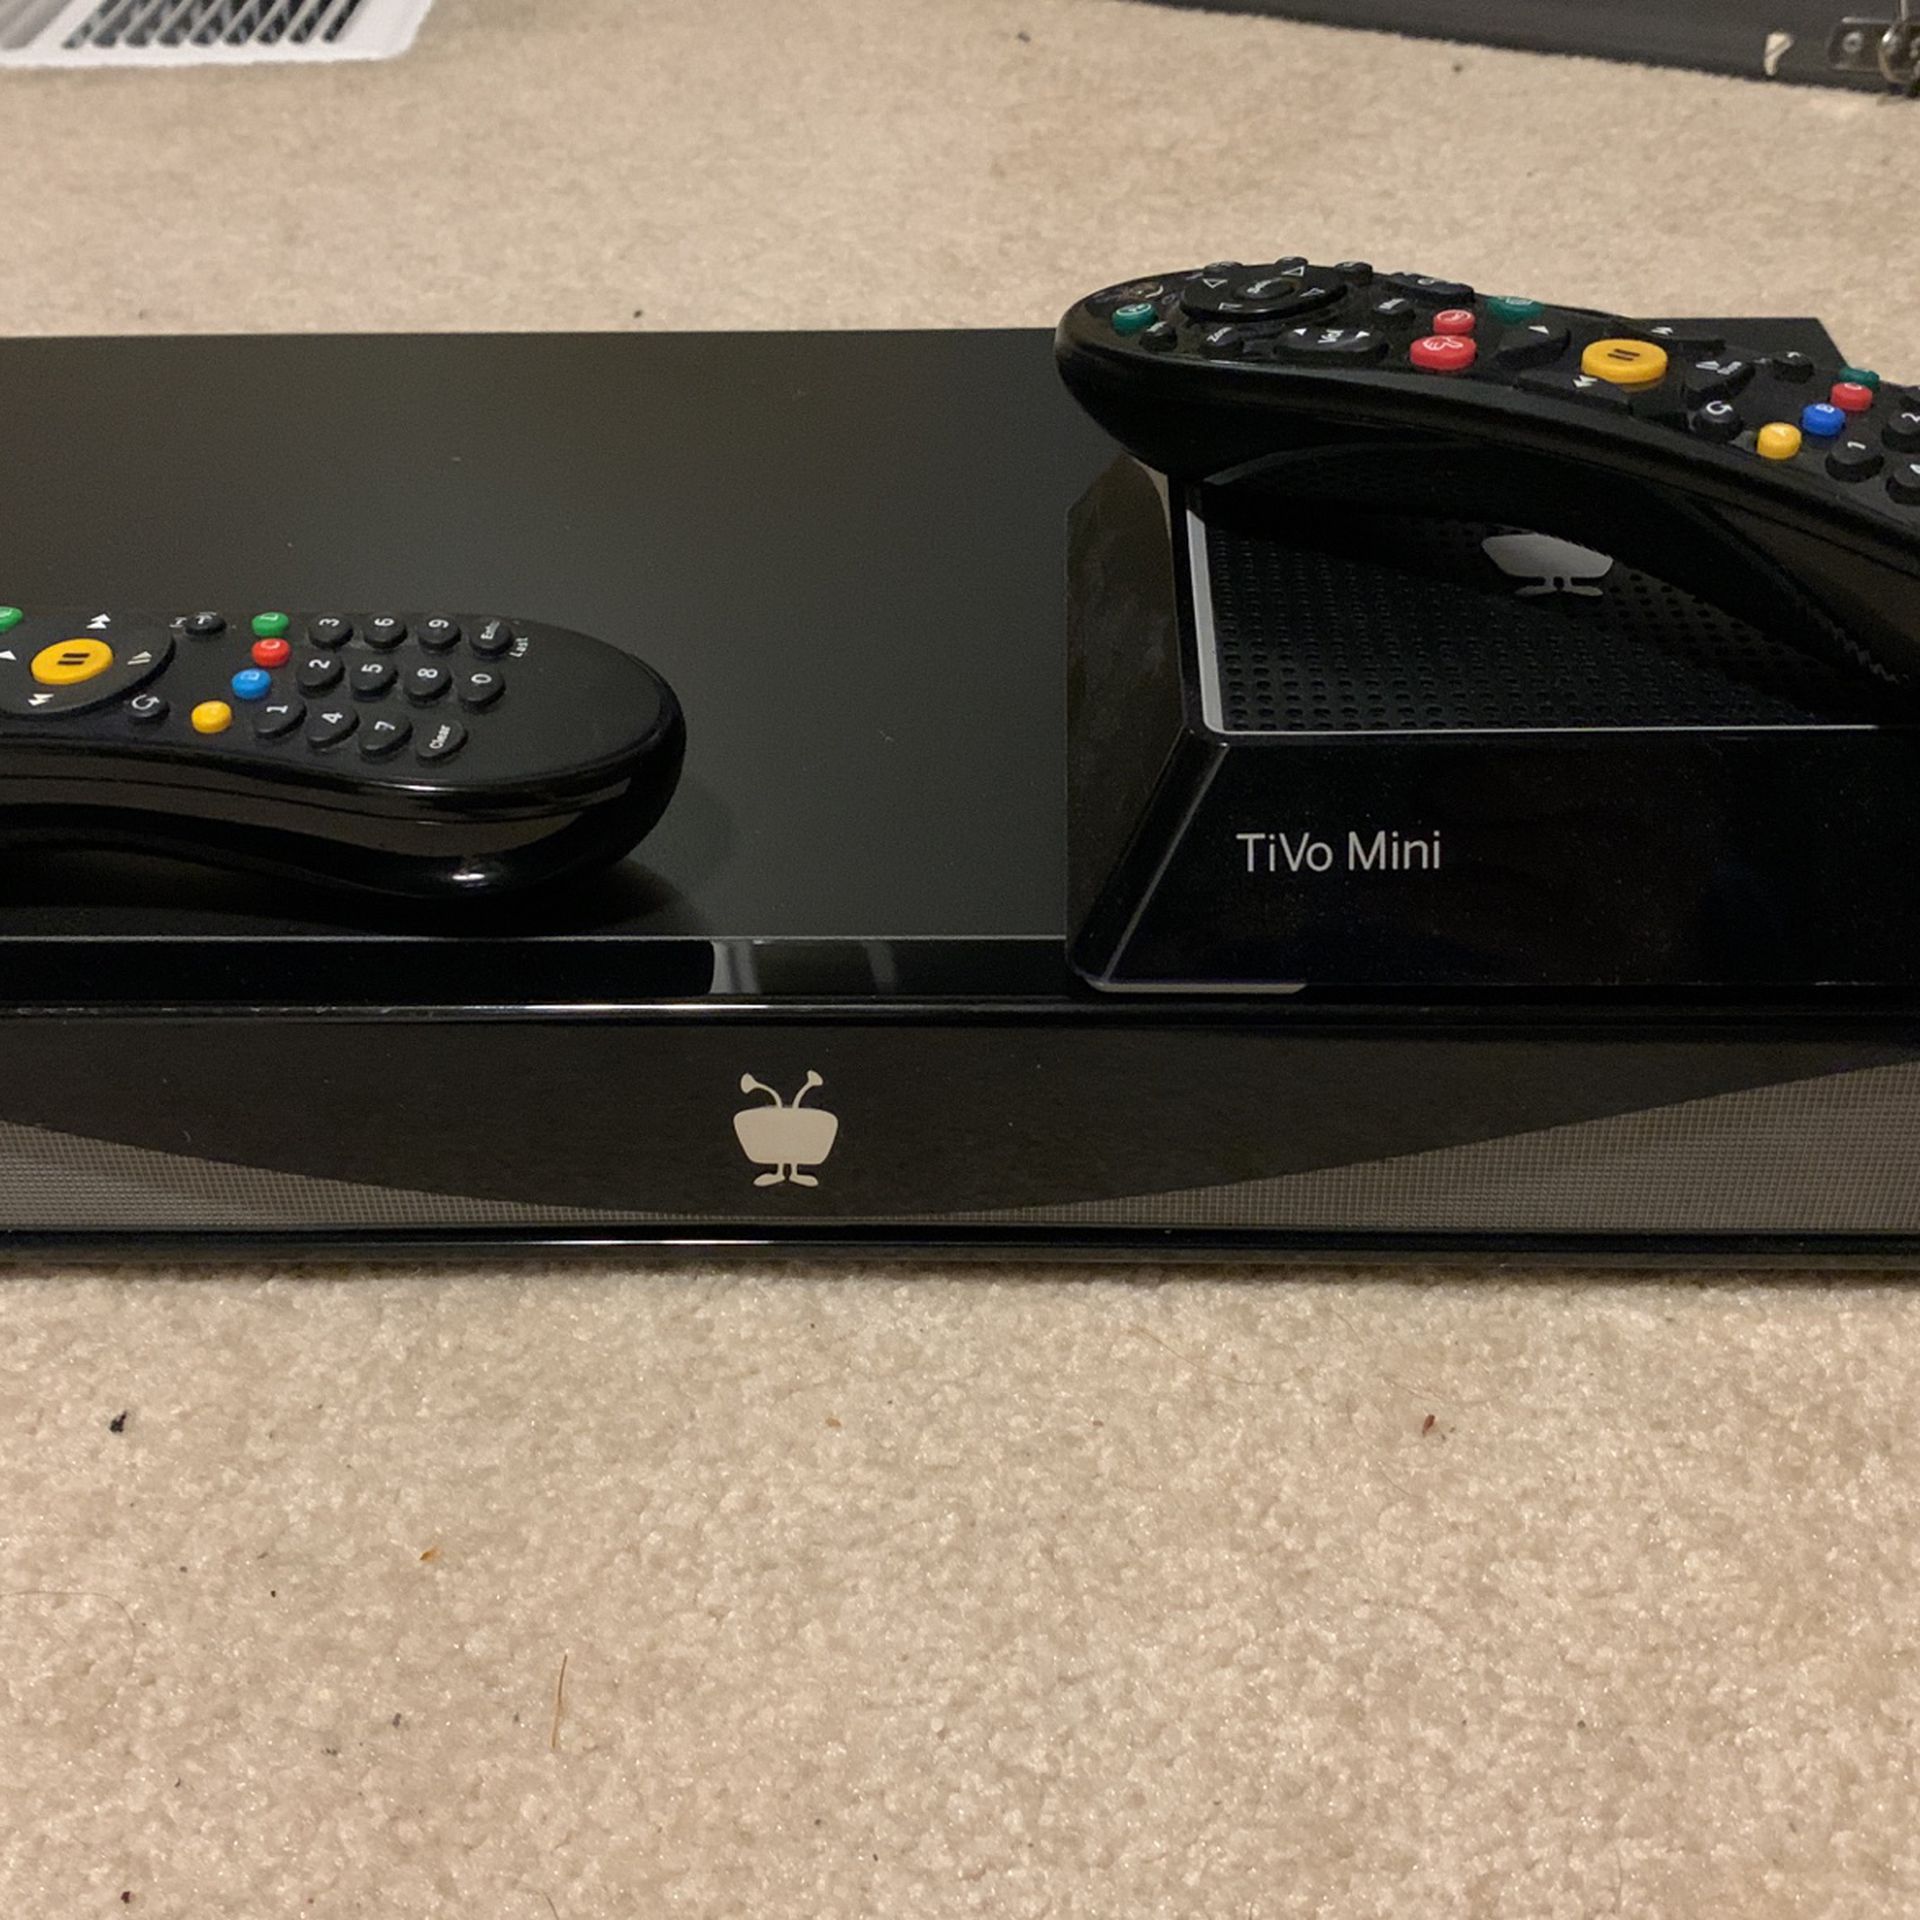 TiVo Roamio Plus And One TiVo Mini (older version) - Buy as a package $125 or see description for individual prices.